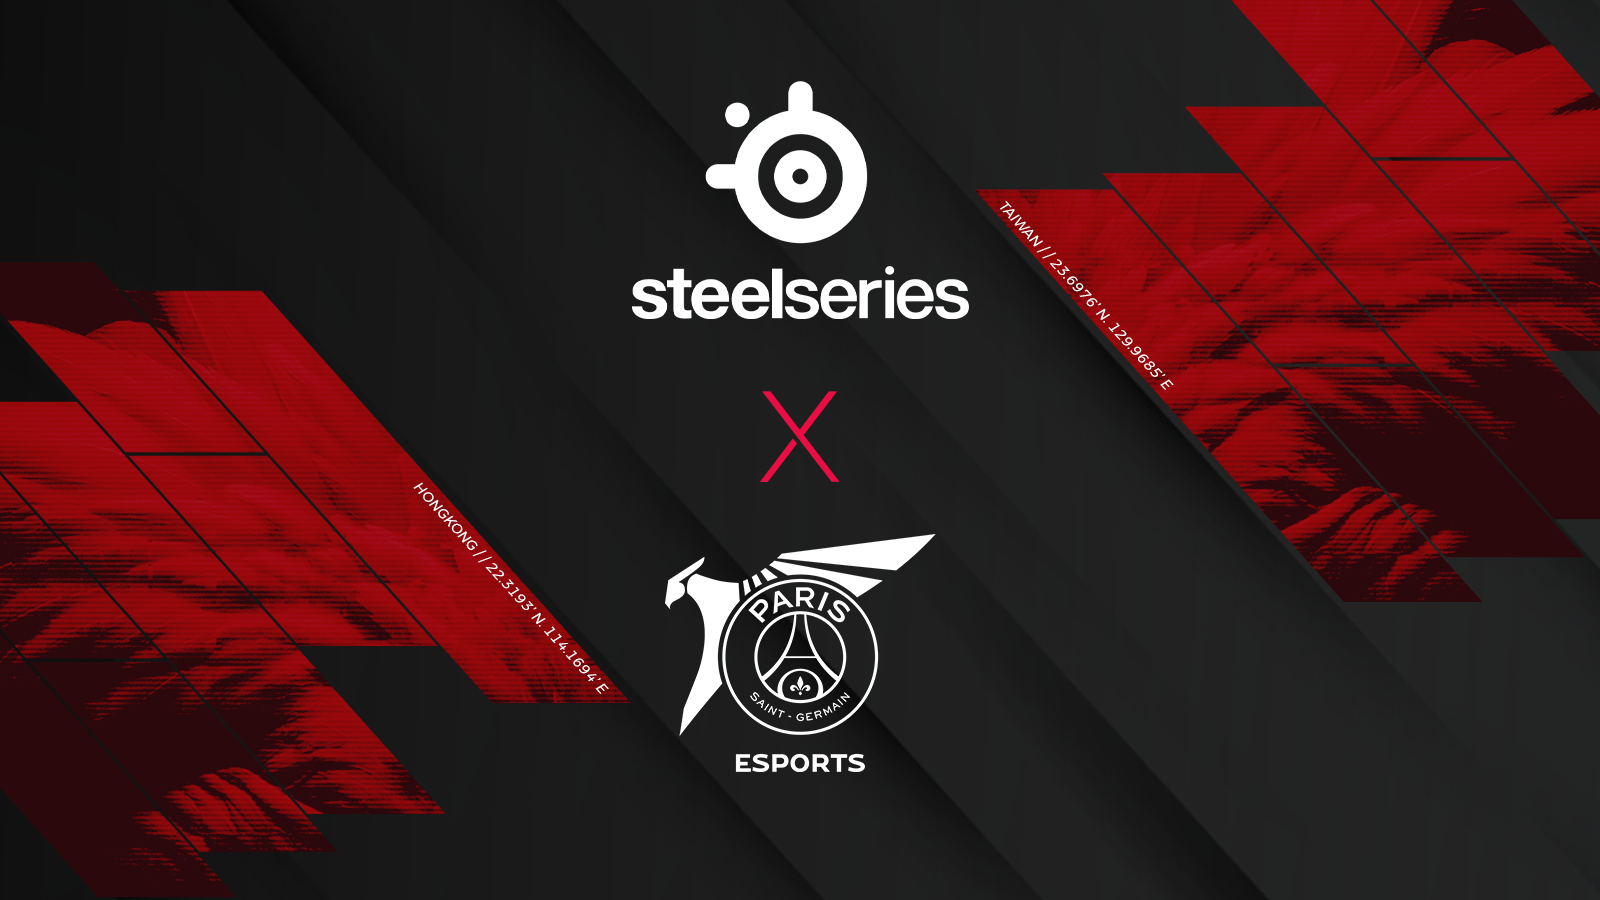 PSG TALON PARTNERS UP WITH STEELSERIES